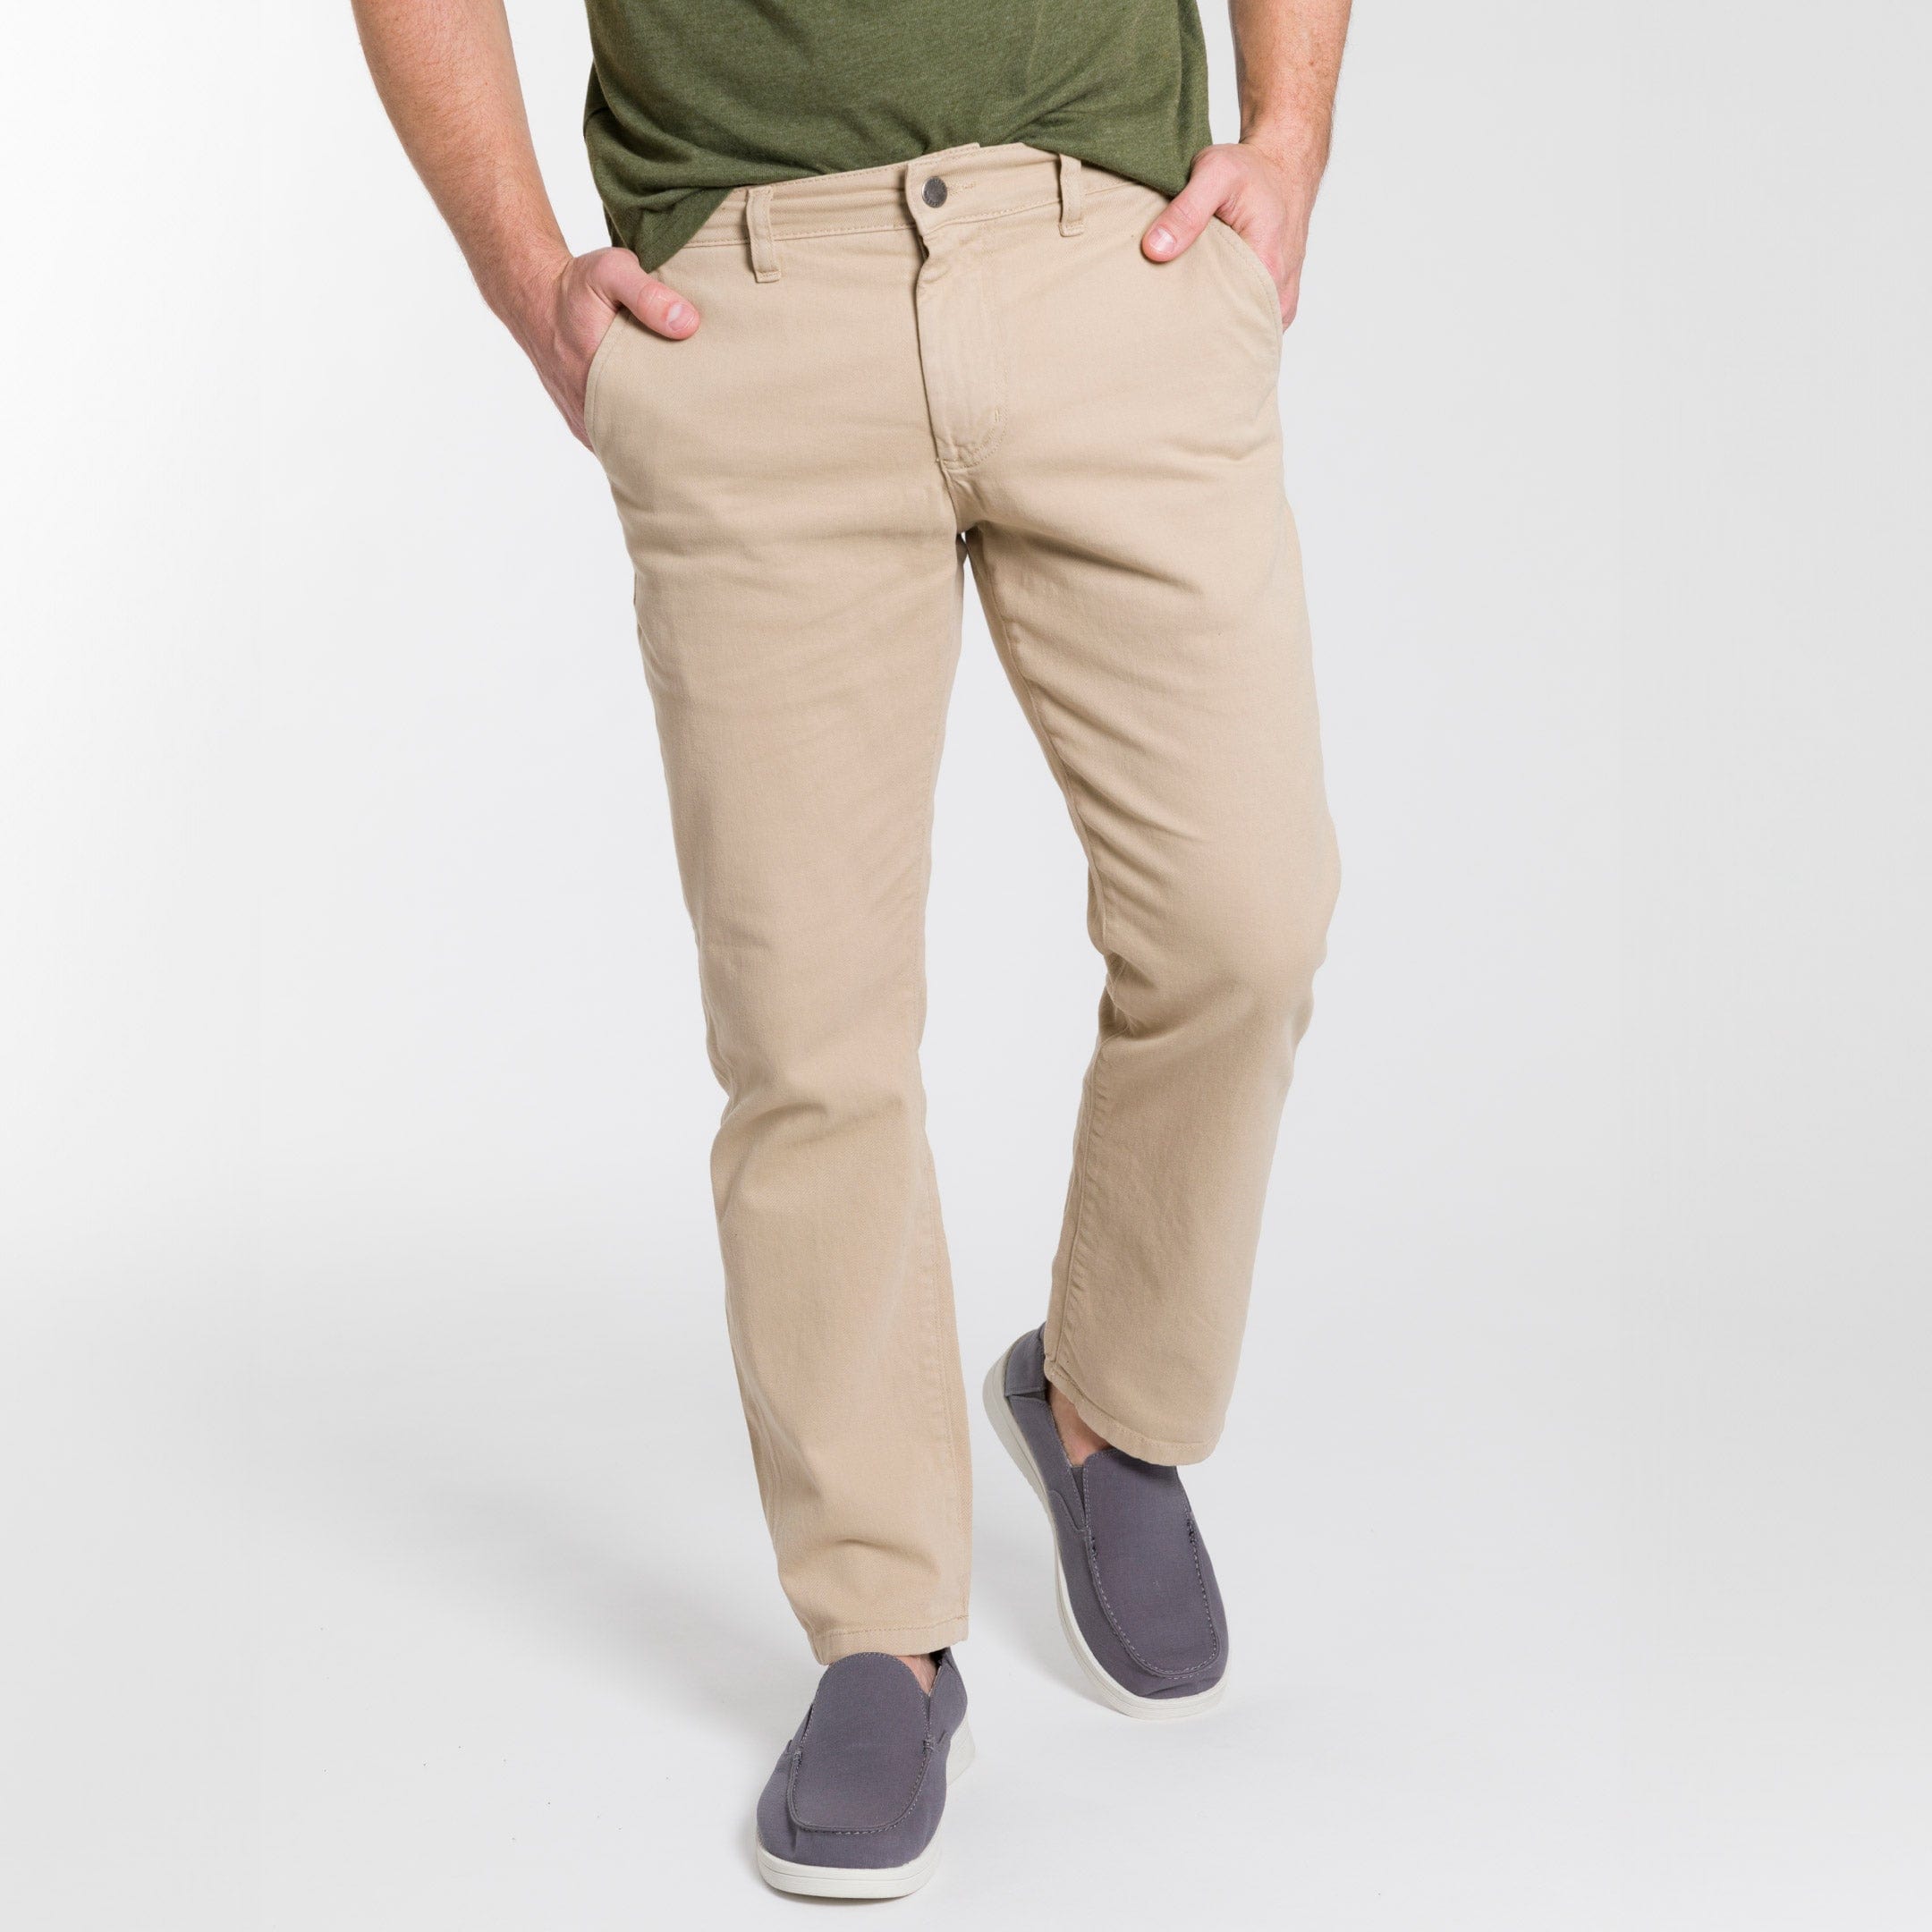 How to Wear Beige Chinos (554 looks), Men's Fashion